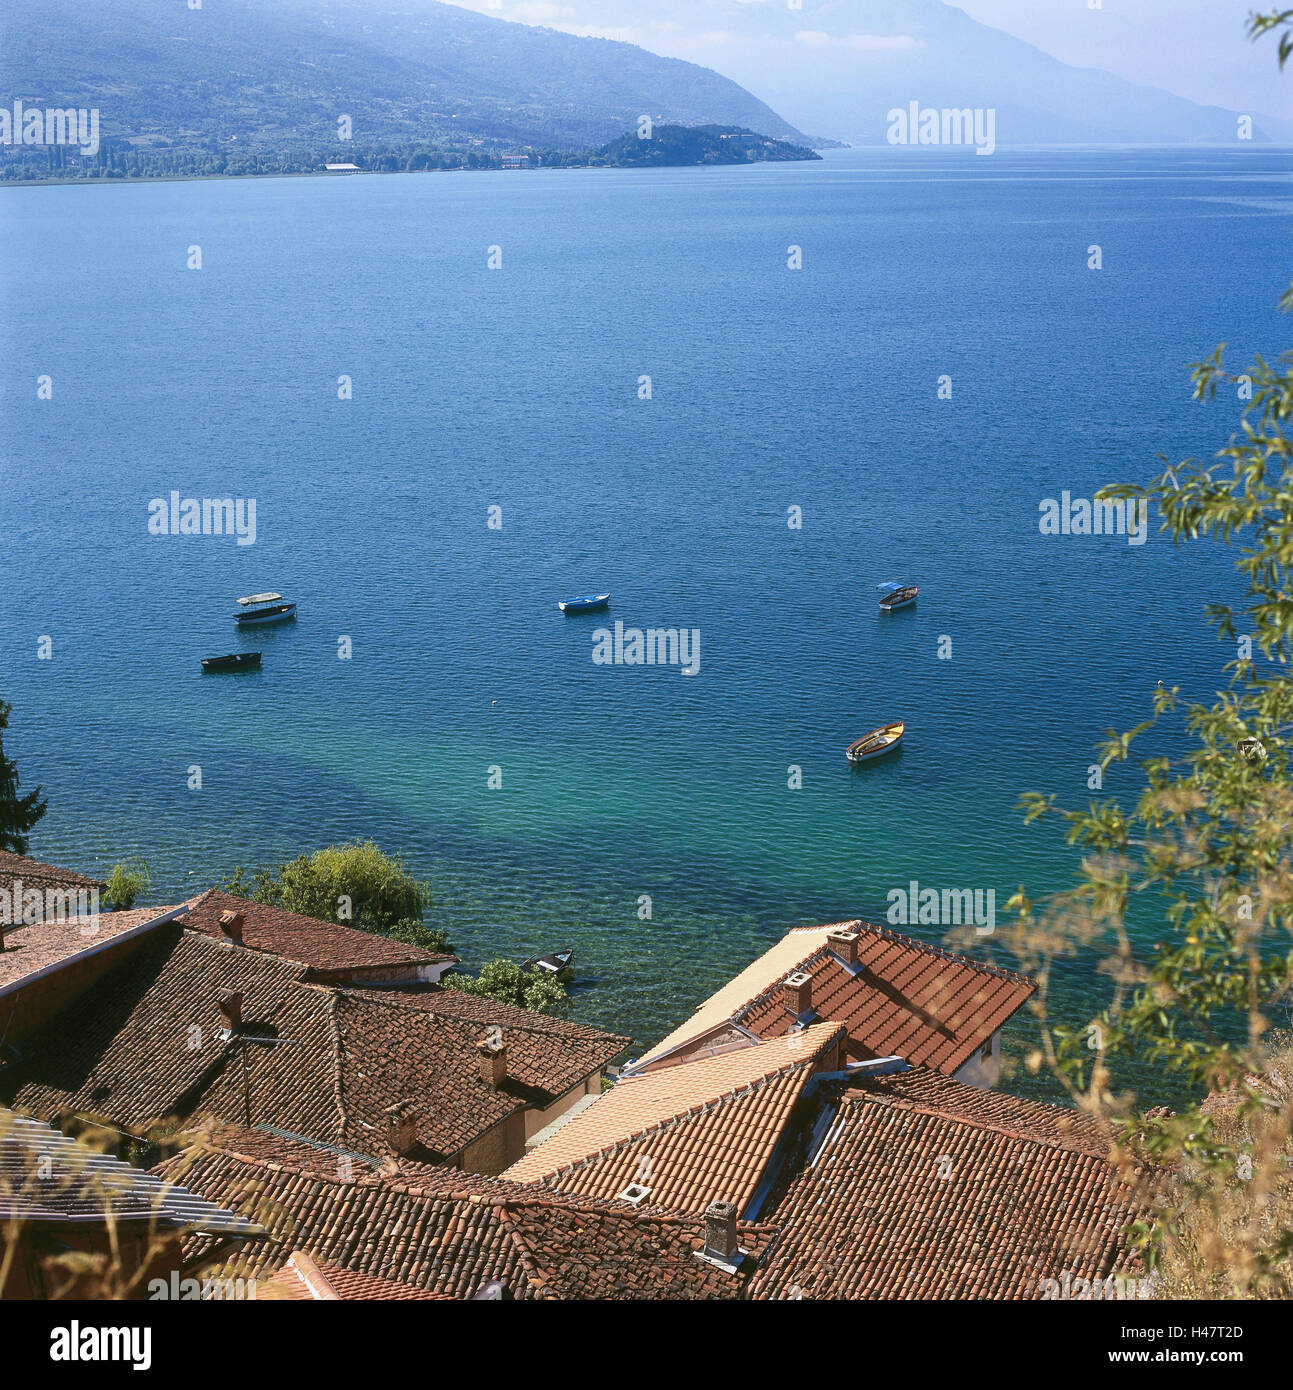 Macedonia, Ohrid, houses, roofs, overview, lake, Southeast Europe, the Balkans, place of interest, destination, town, UNESCO-world cultural heritage, water, boots, house roofs, Stock Photo